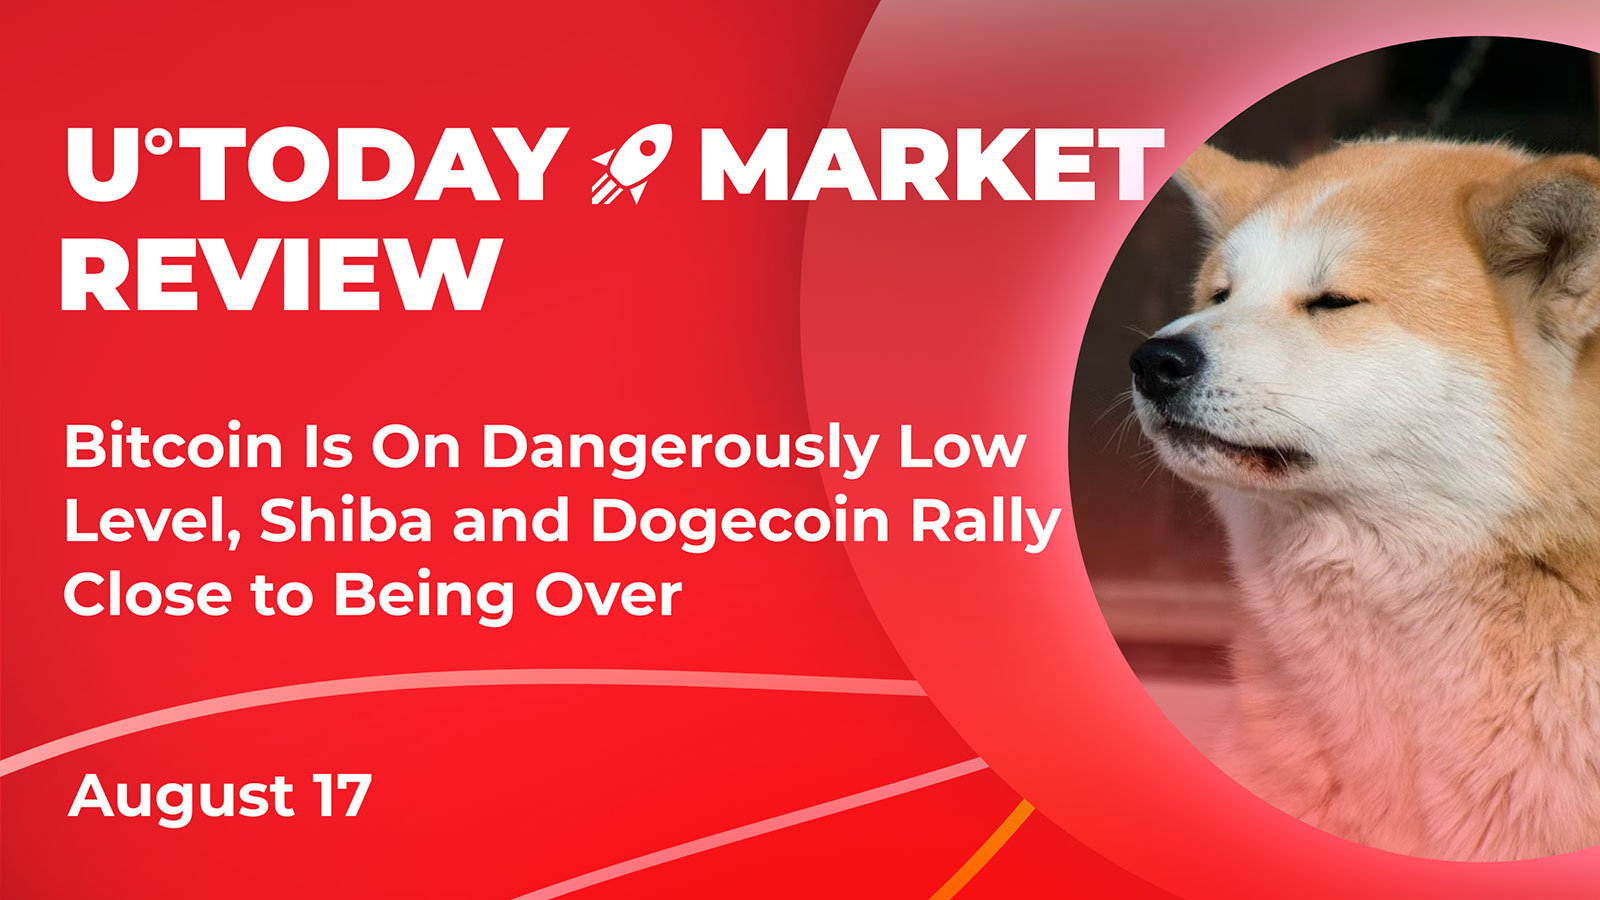 Bitcoin Is at Dangerously Low Level, Shiba and Doge Rally Close to Being Over: Crypto Market Review, August 17